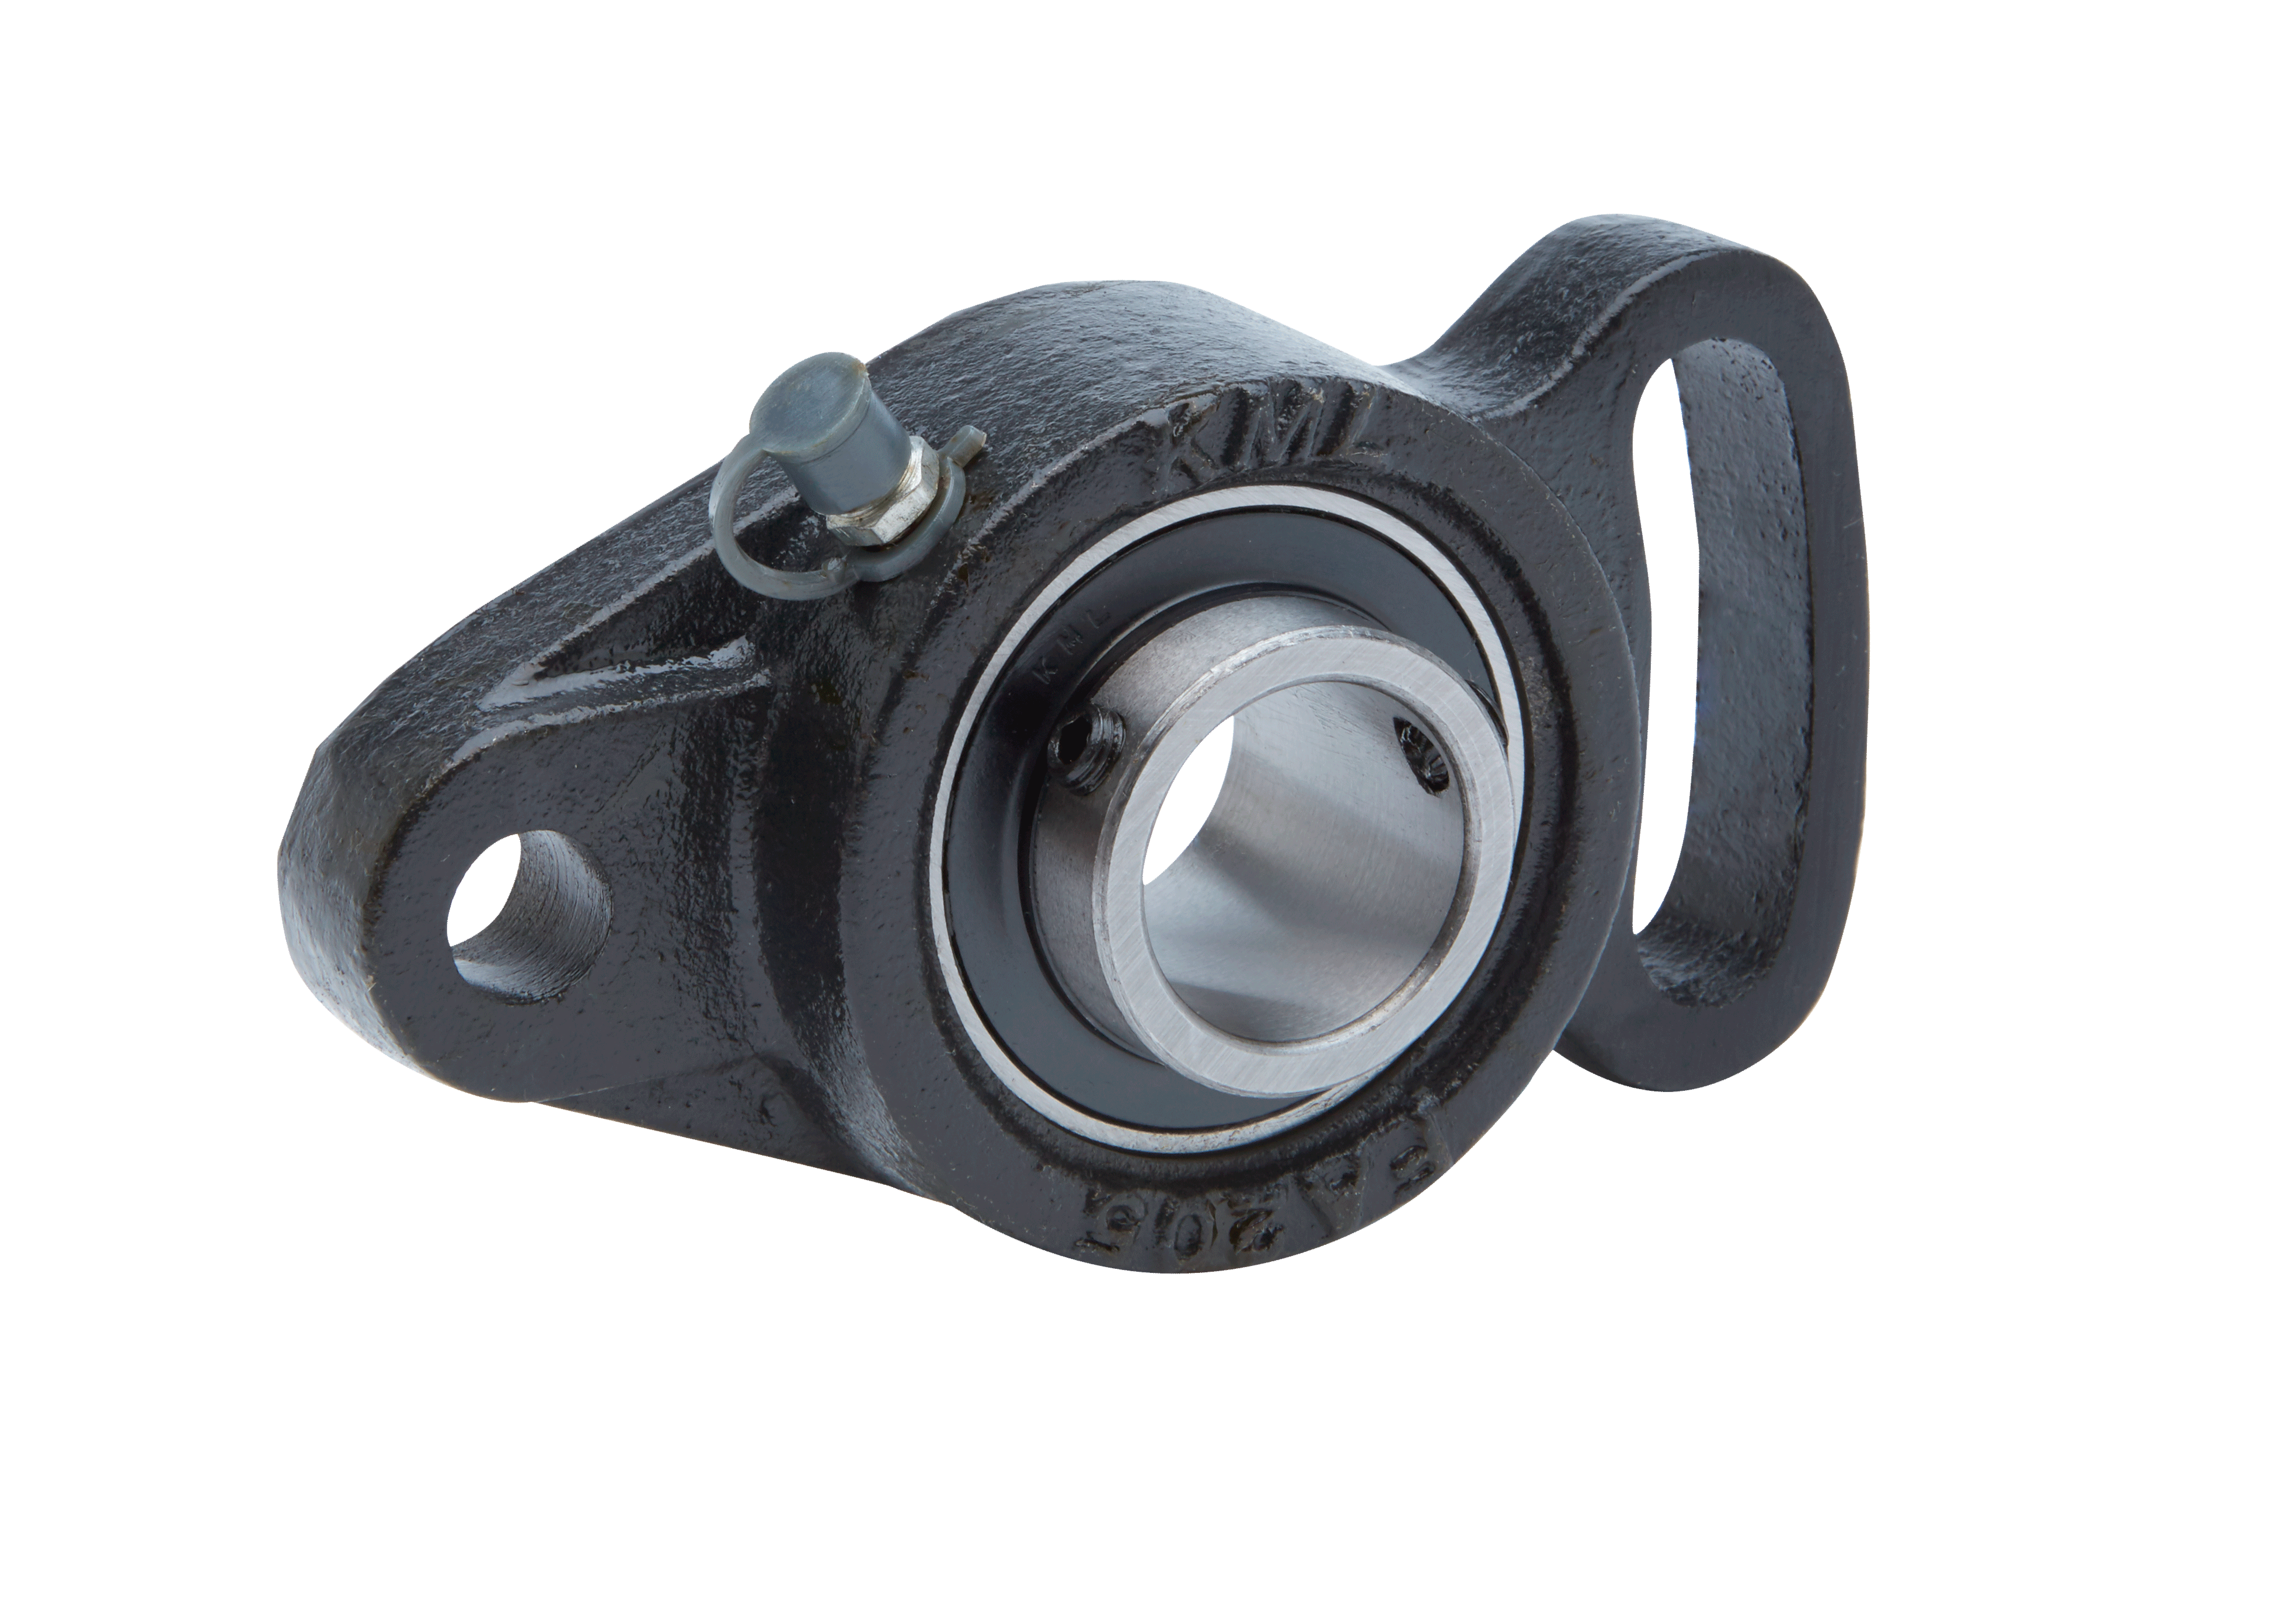 Contact Seal Concentric Collar Locking Cast Iron Housing 1.1875 in Bore Two-Bolt Flange 128762 Flange-Mount Ball Bearing Unit Standard Duty